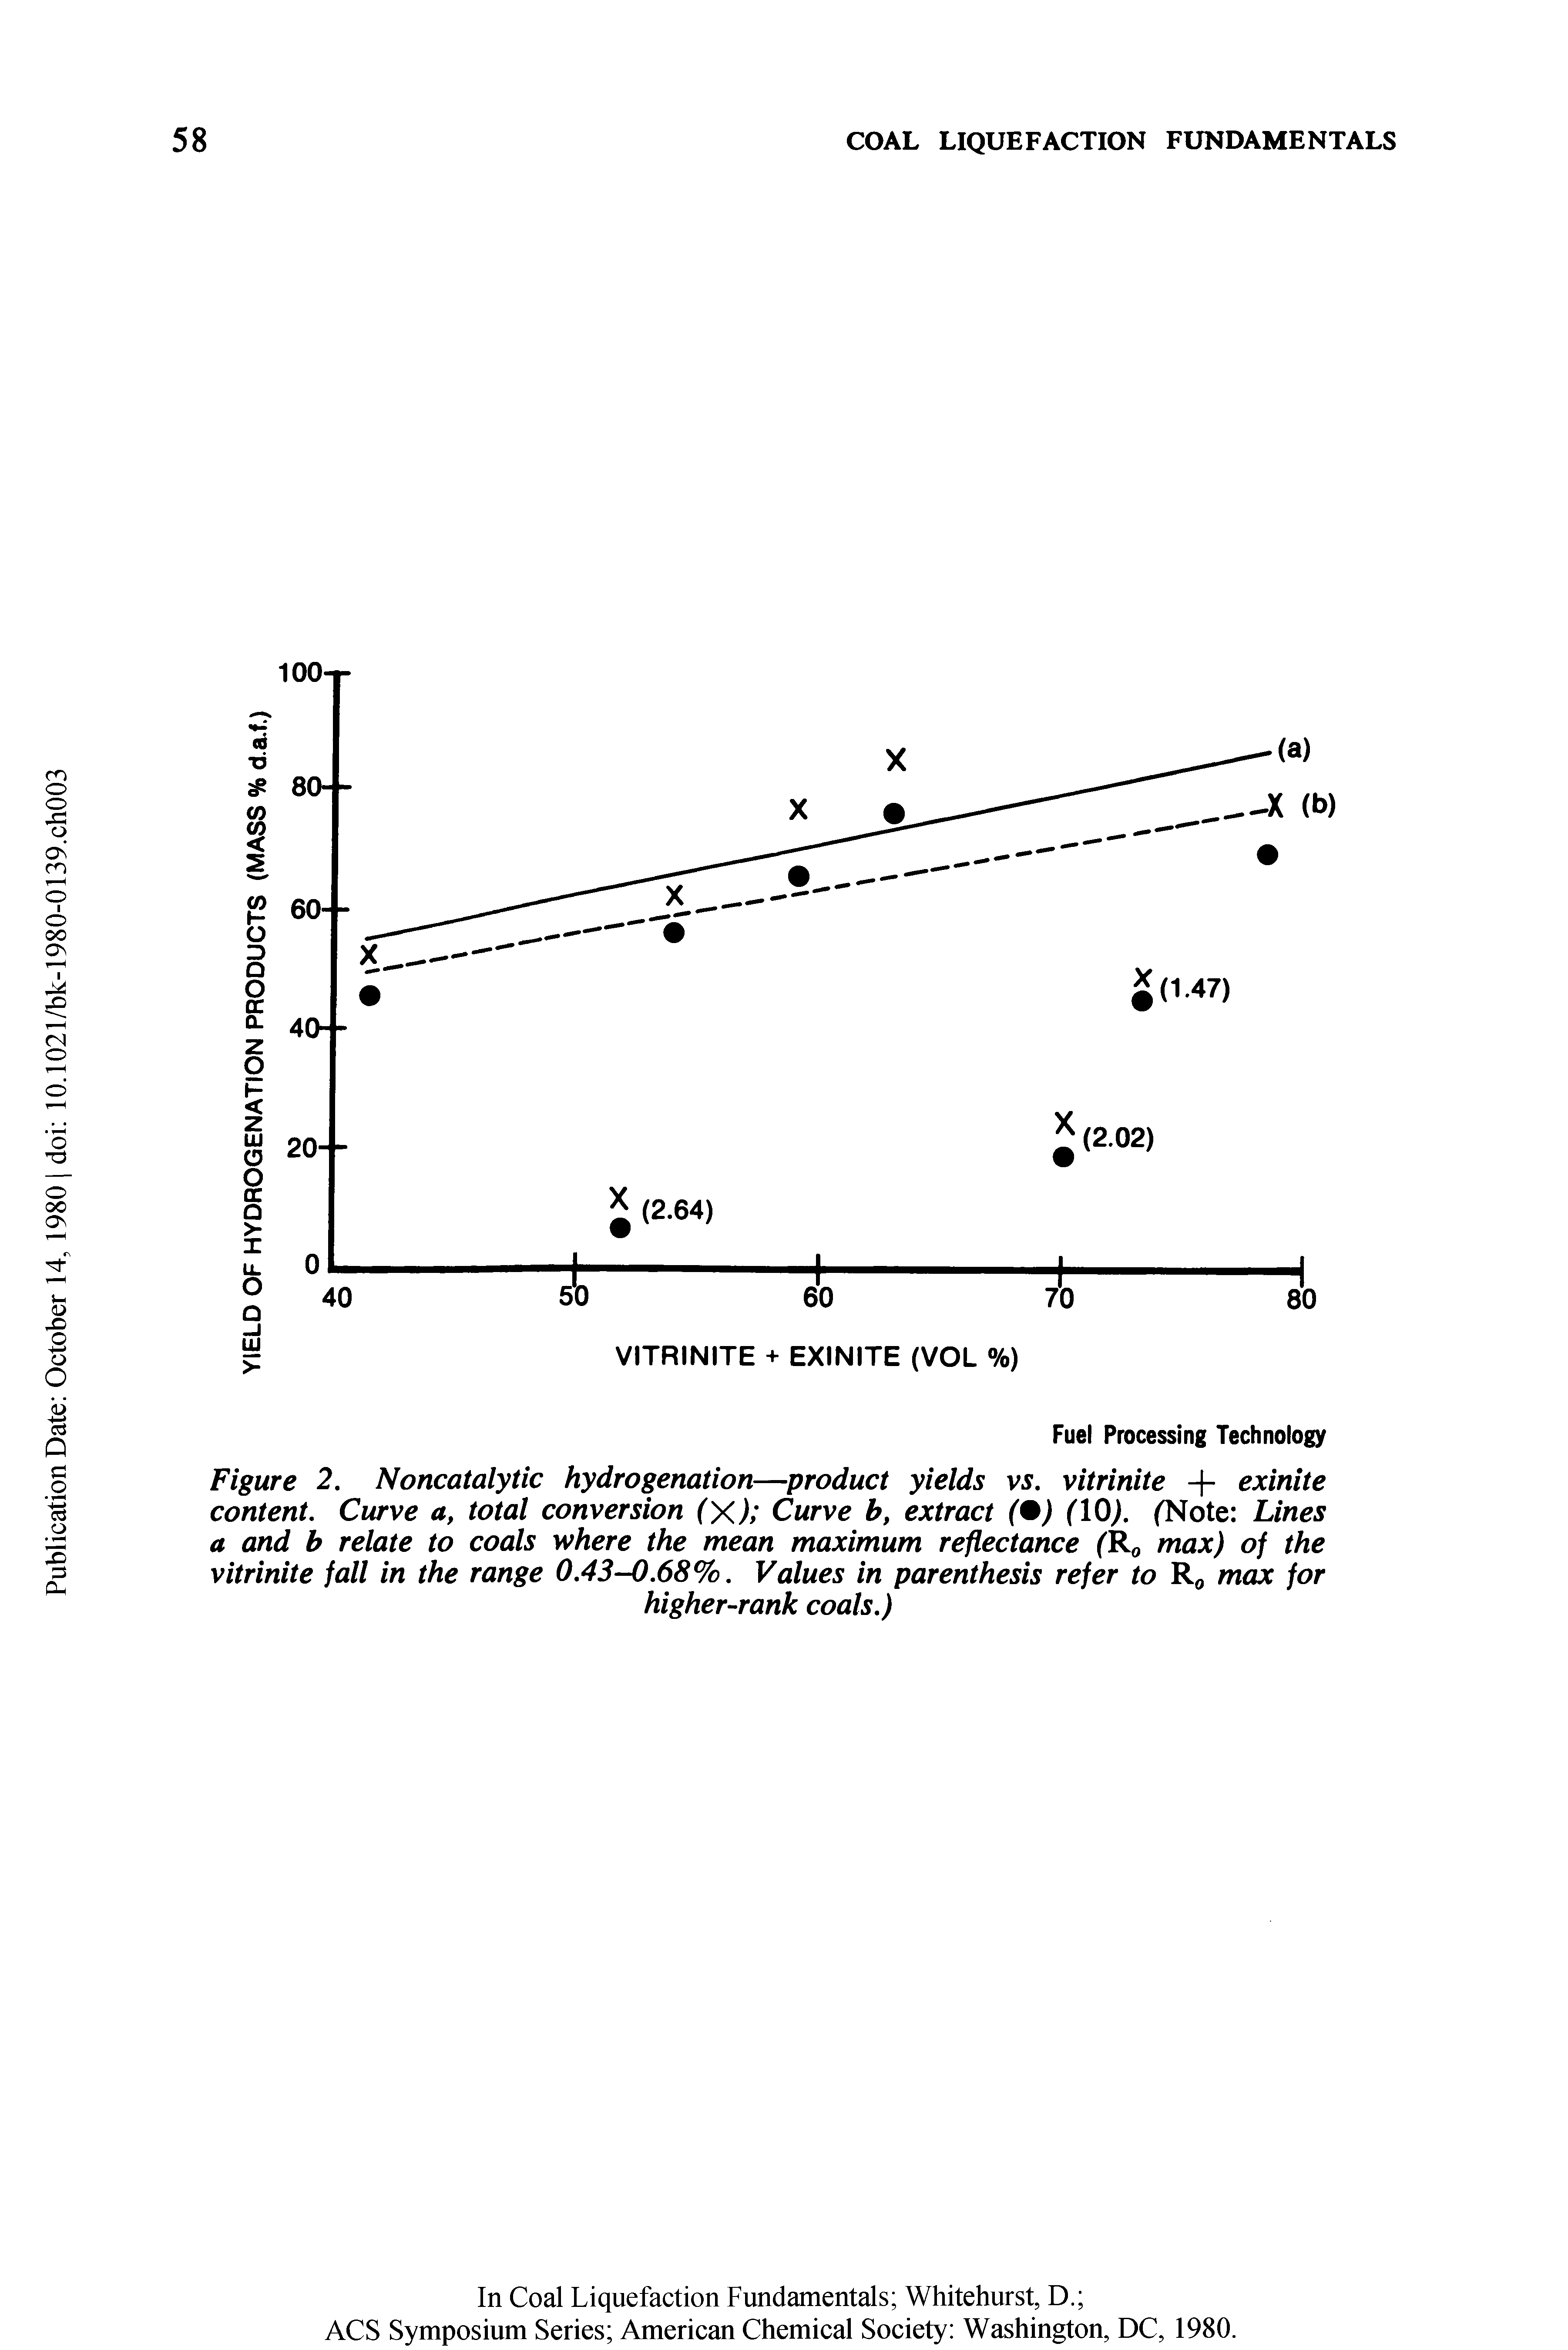 Figure 2. Noncatalytic hydrogenation—product yields vs. vitrinite + exinite content. Curve a, total conversion (X) Curve b, extract ( ) (10). (Note Lines a and b relate to coals where the mean maximum reflectance (R0 max) of the vitrinite fall in the range 0.43-0.68%. Values in parenthesis refer to R0 max for...